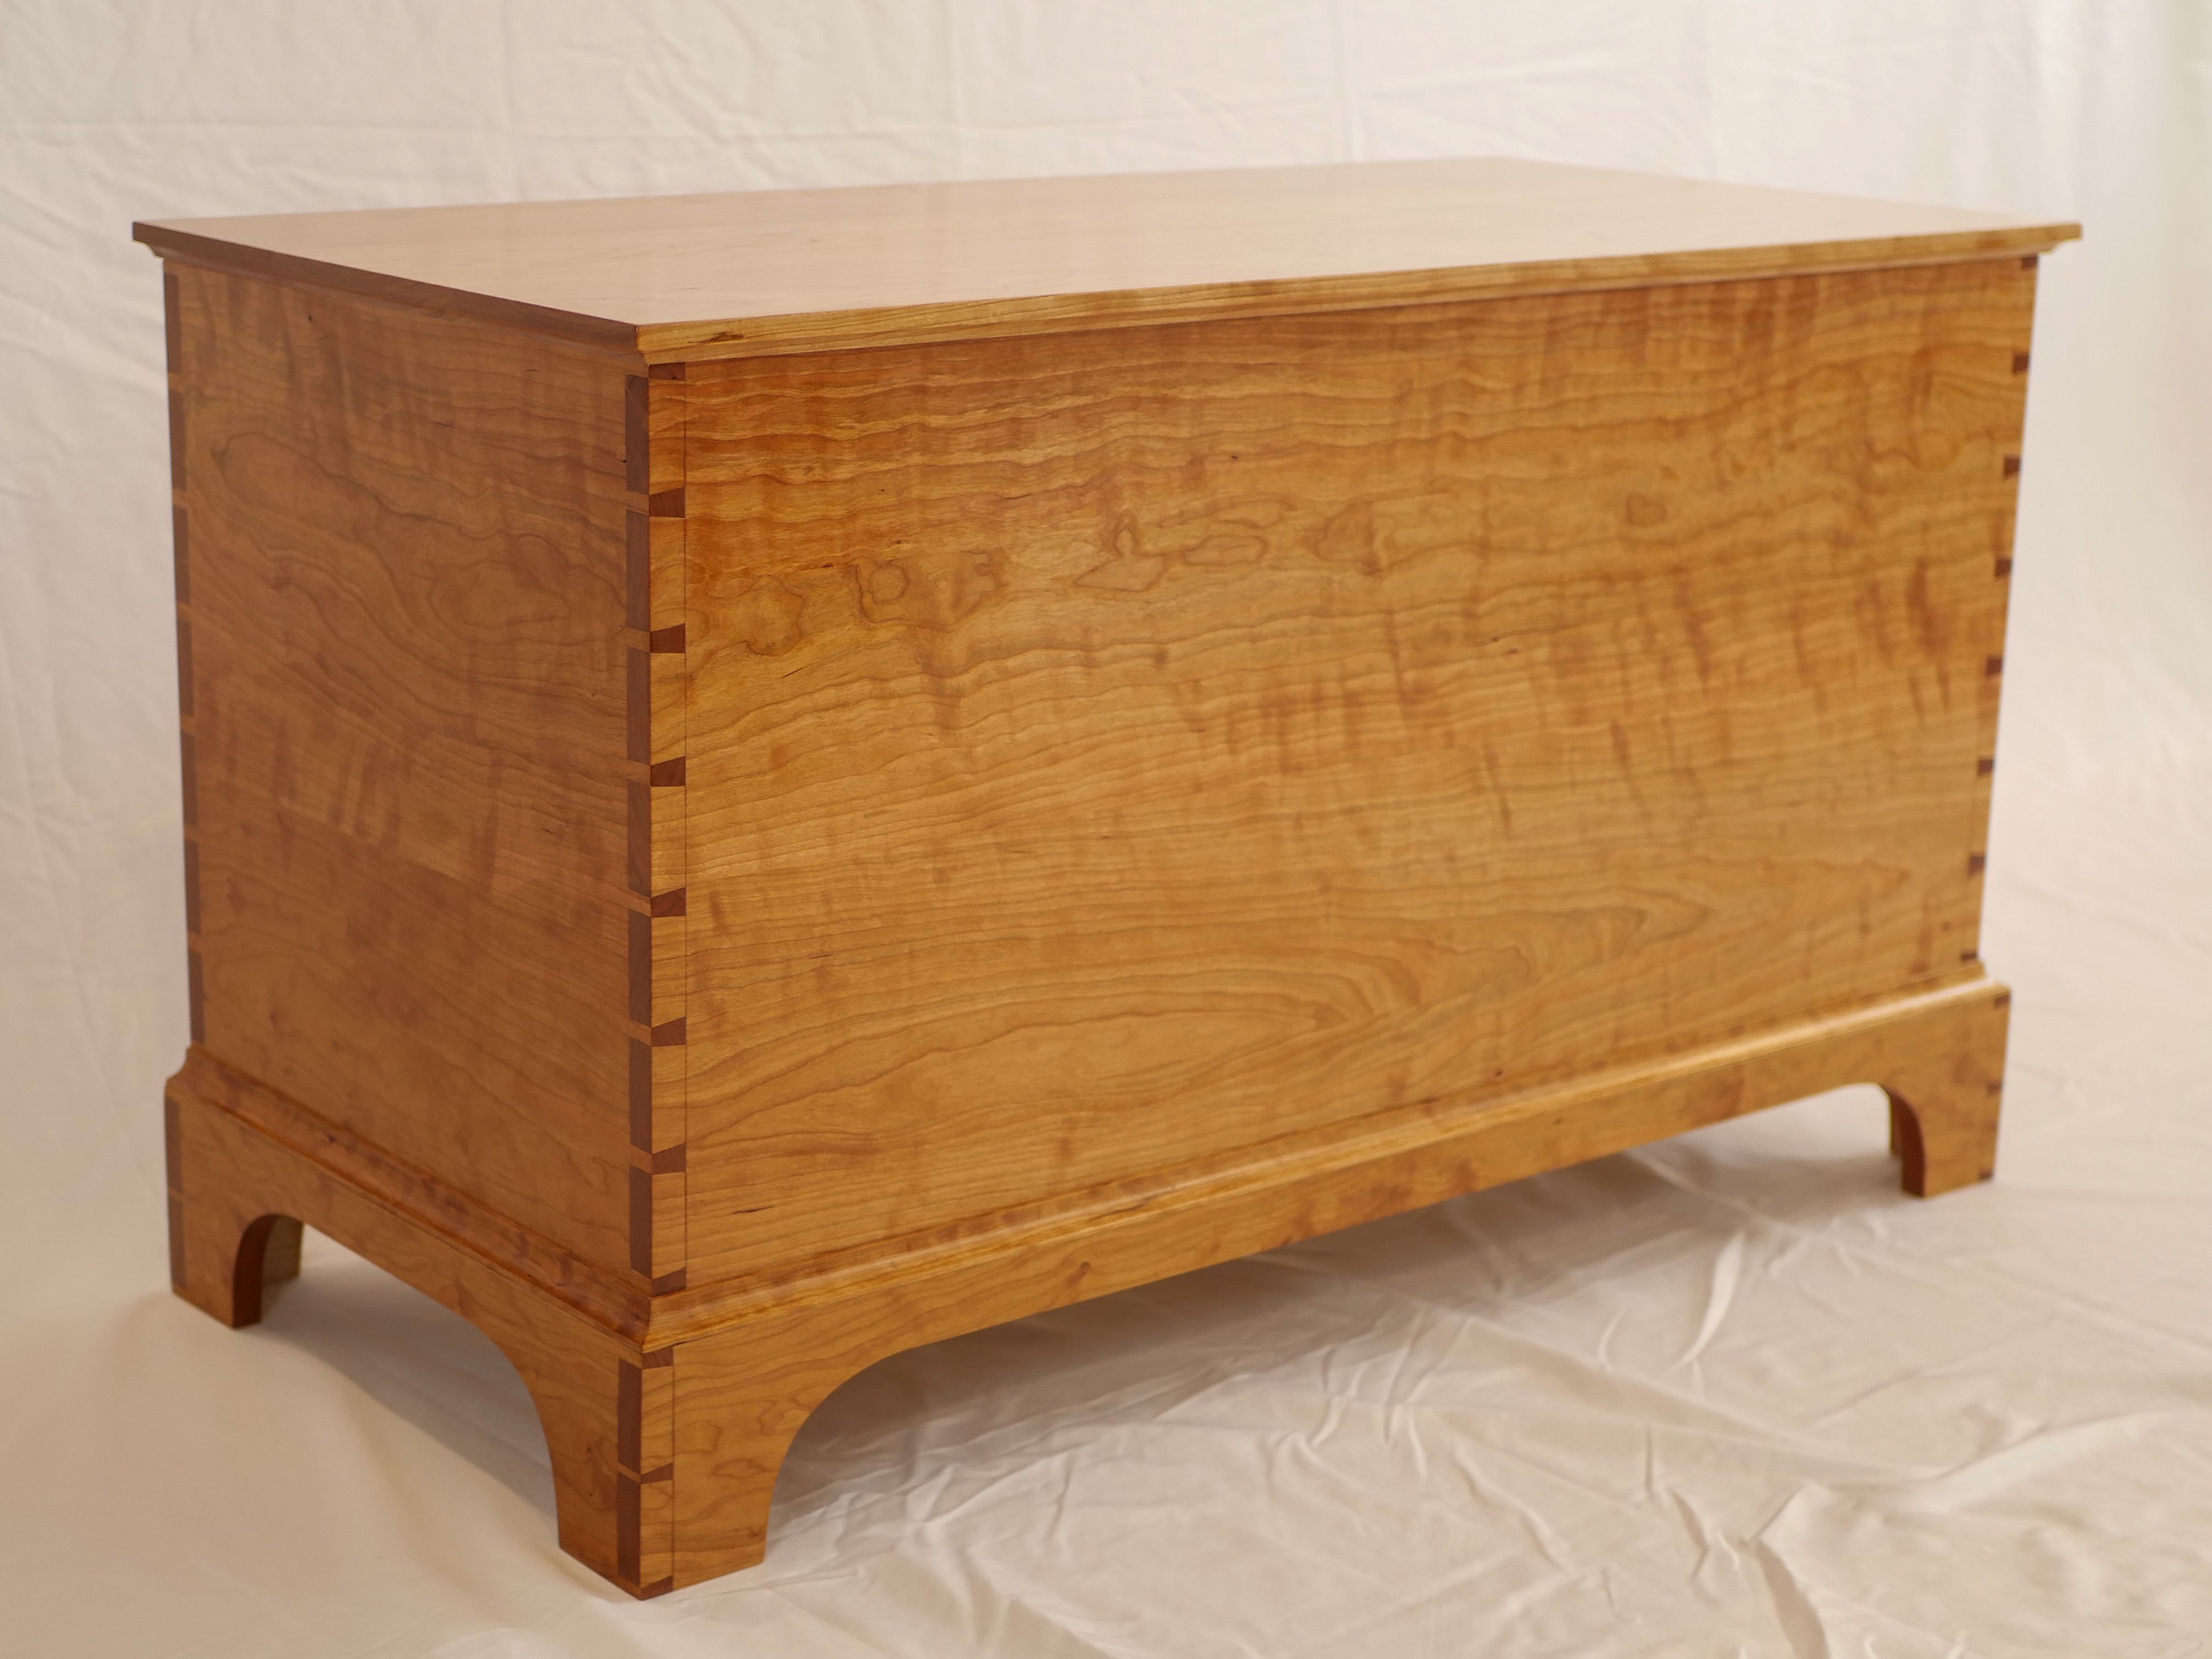 Buy Custom Made Shaker Blanket Chest, made to order from Annisquam Woodcraft